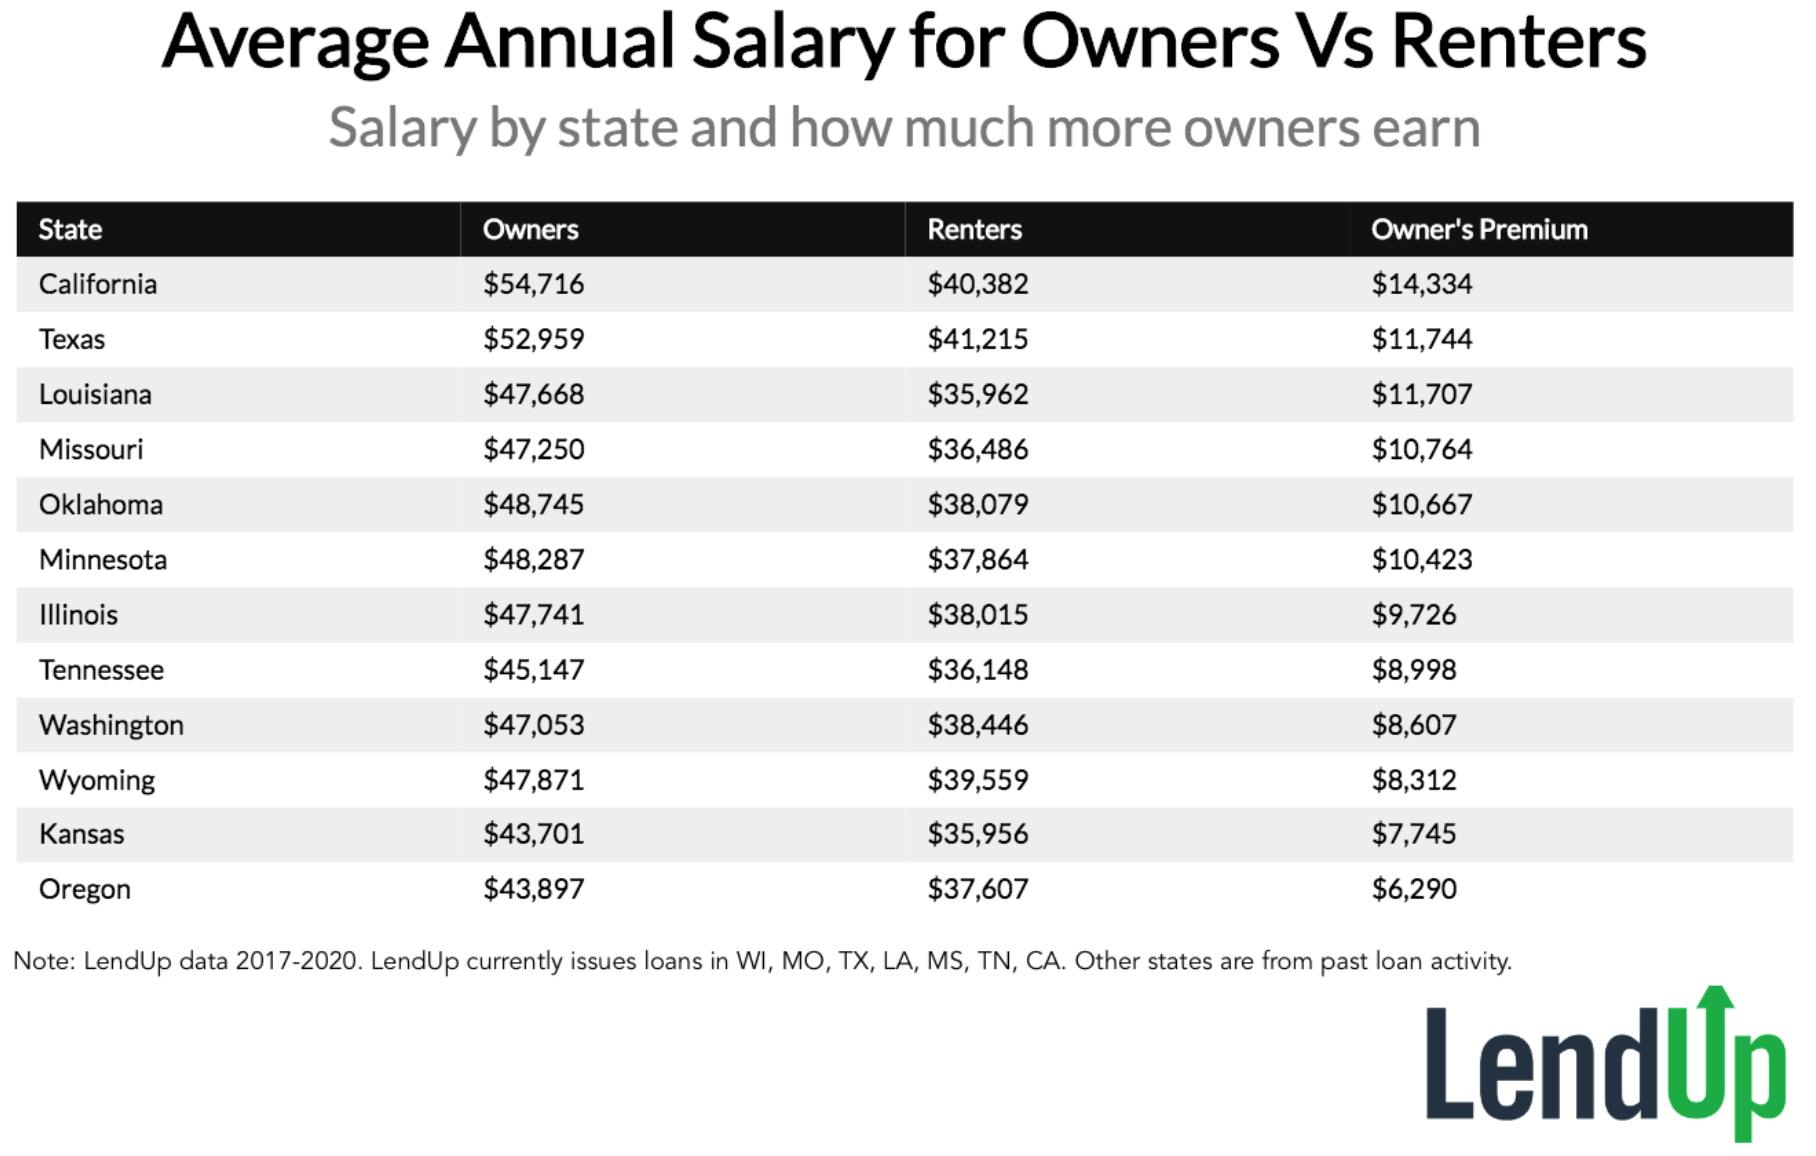 Average Annual Salary for Owners vs Renters